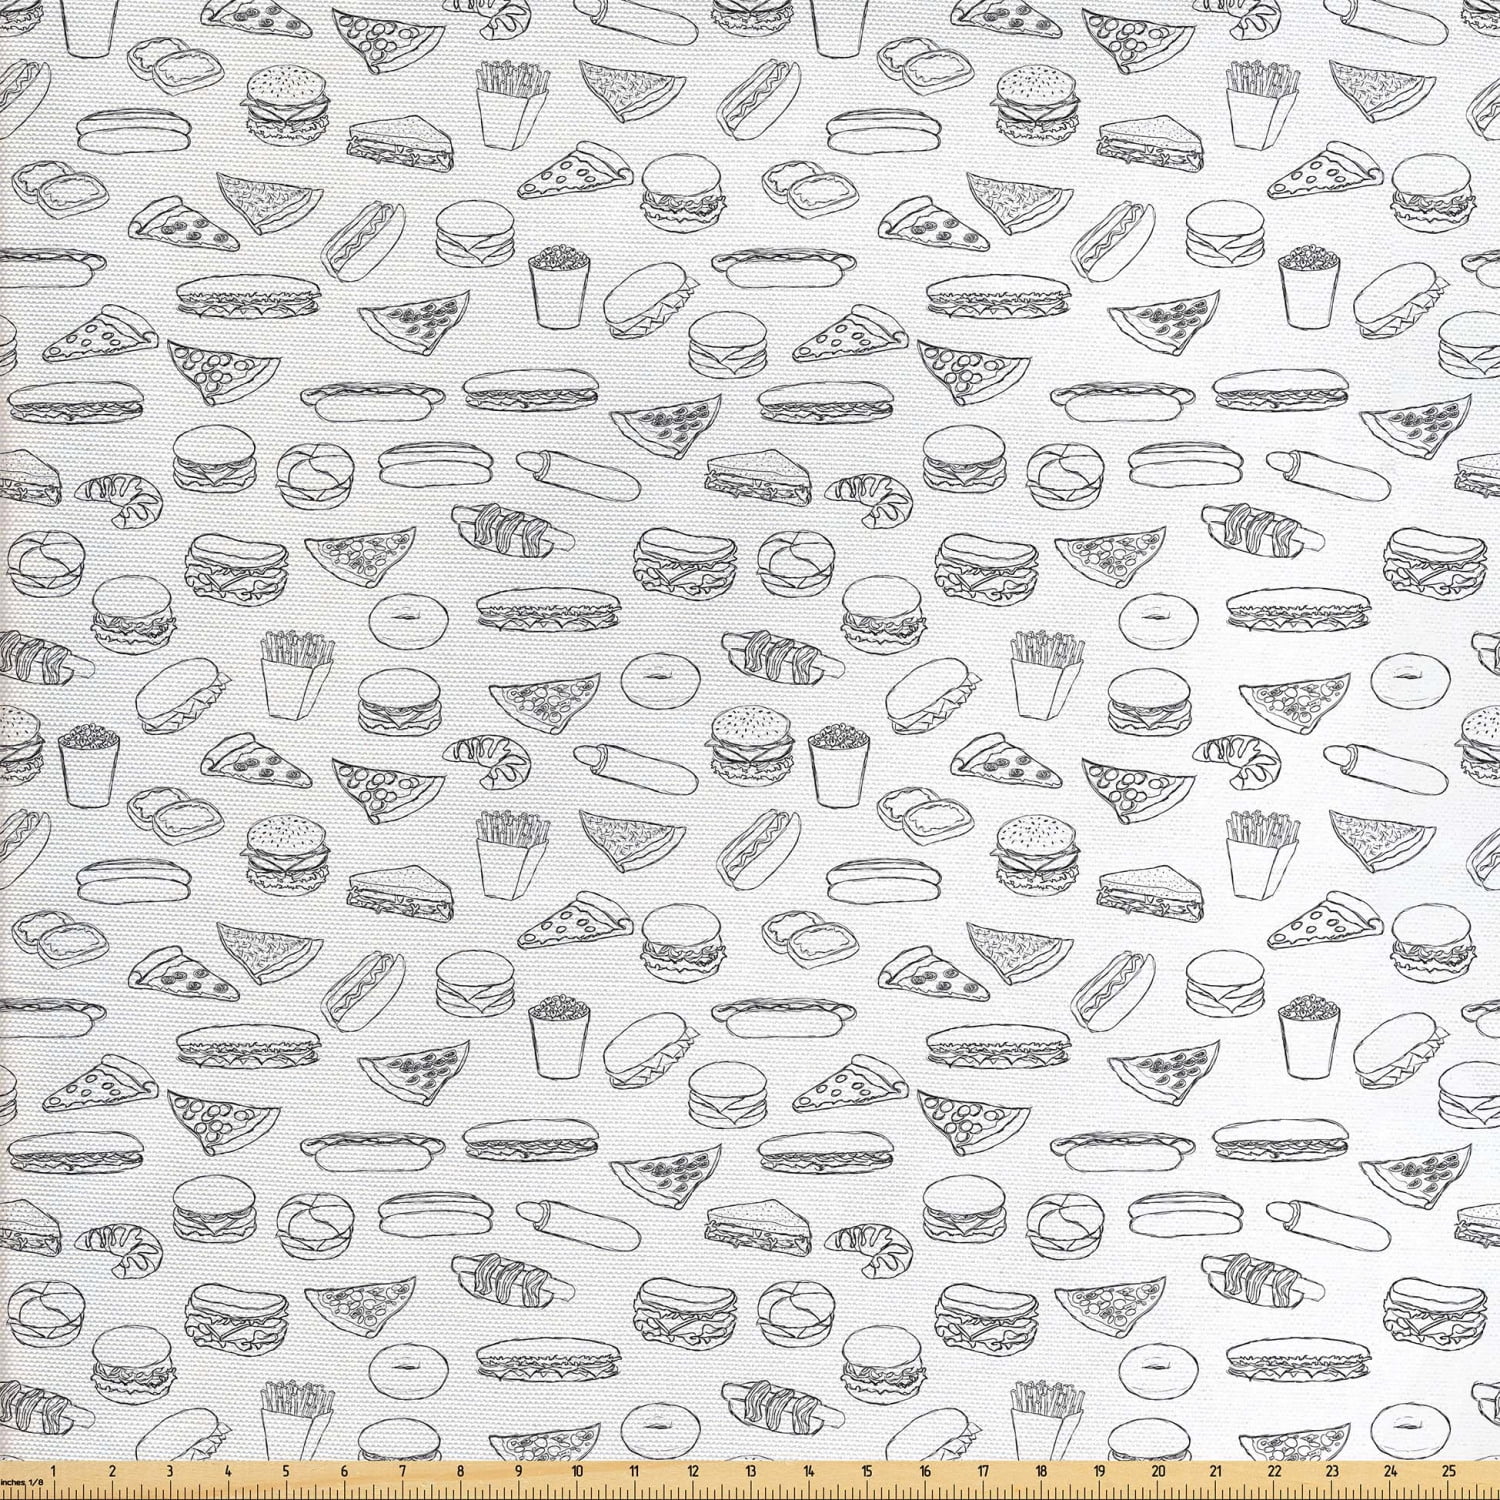 Non Stretch Fabric by the Yard High Quality Poly-Cotton Pizza Doodle Pattern Print 58 Wide